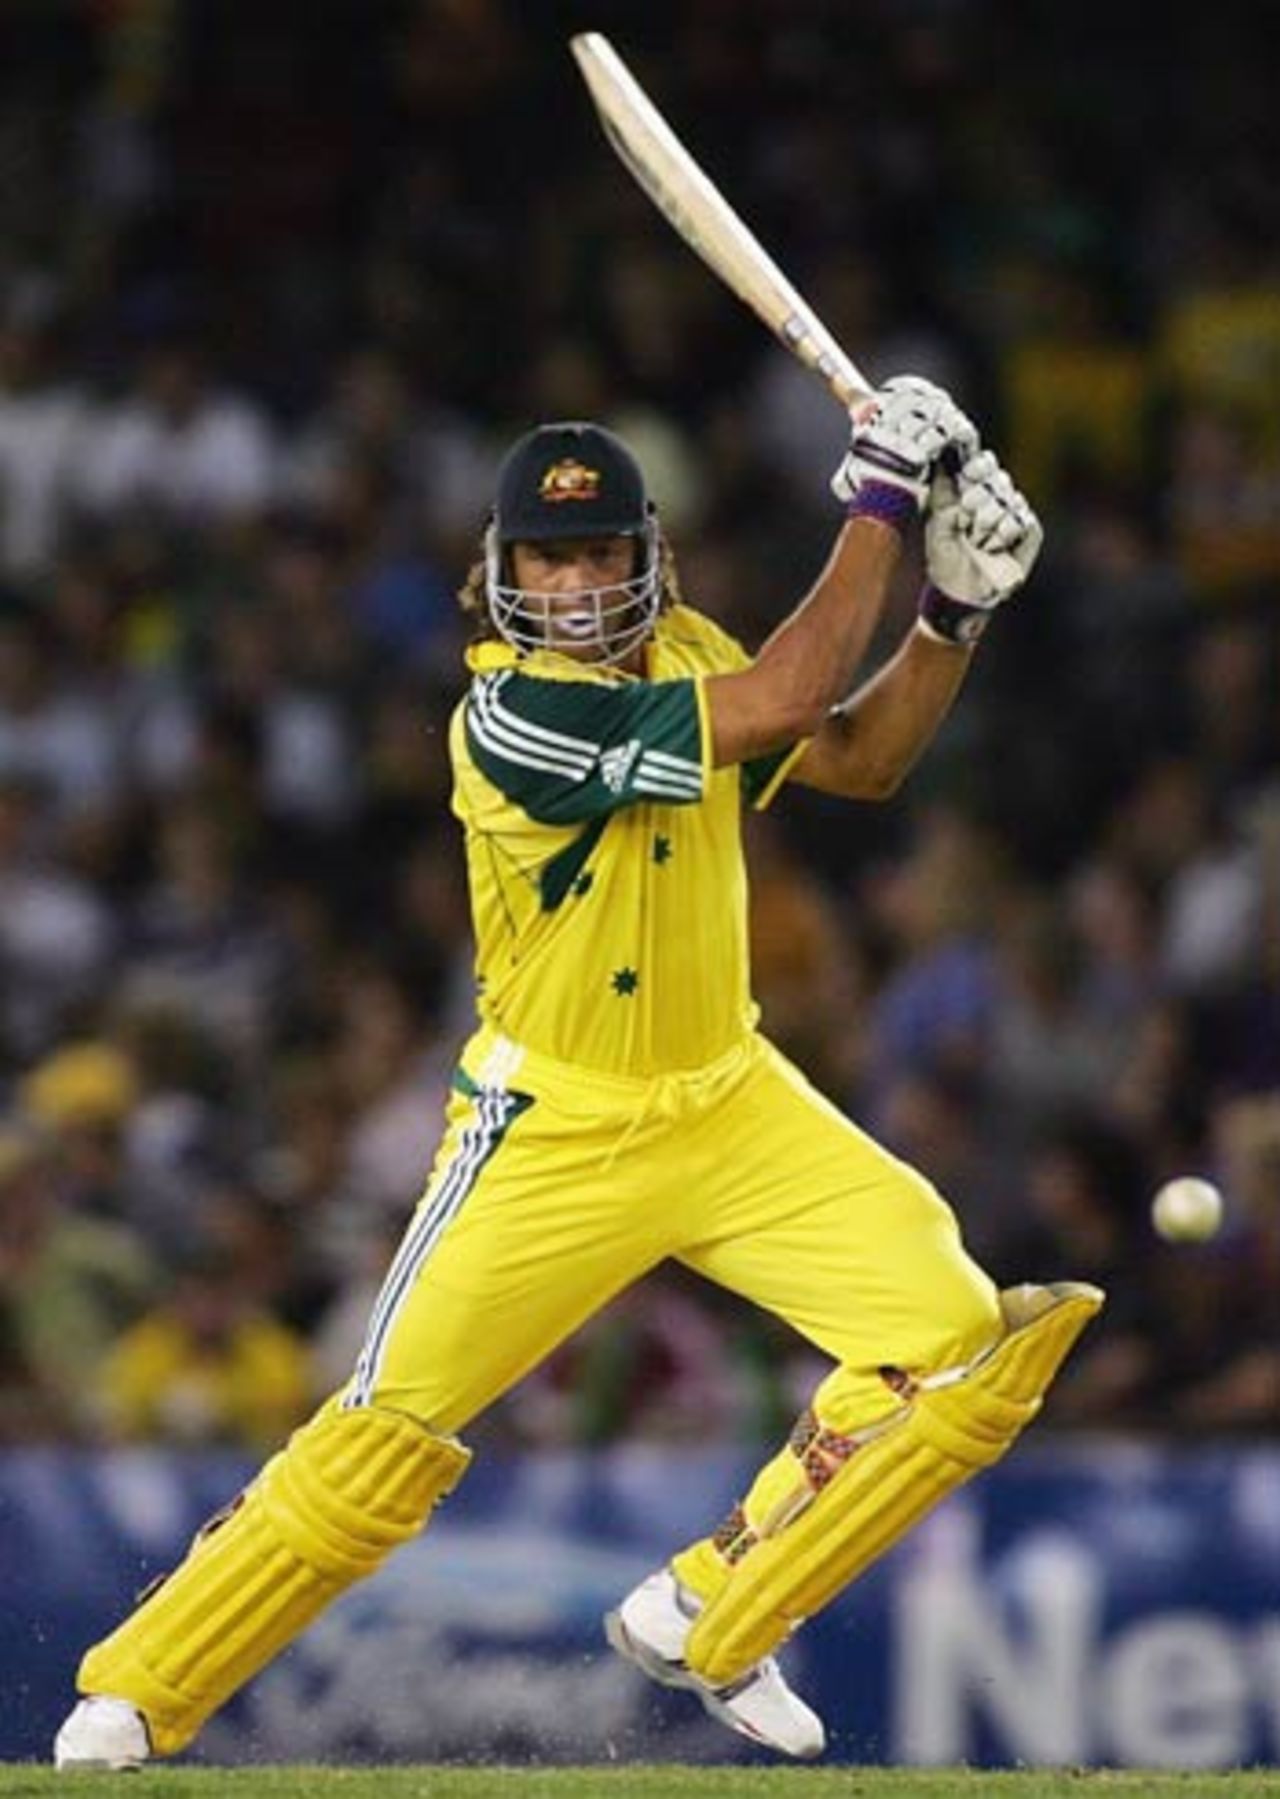 Will Andrew Symonds come out on top for Australia again?